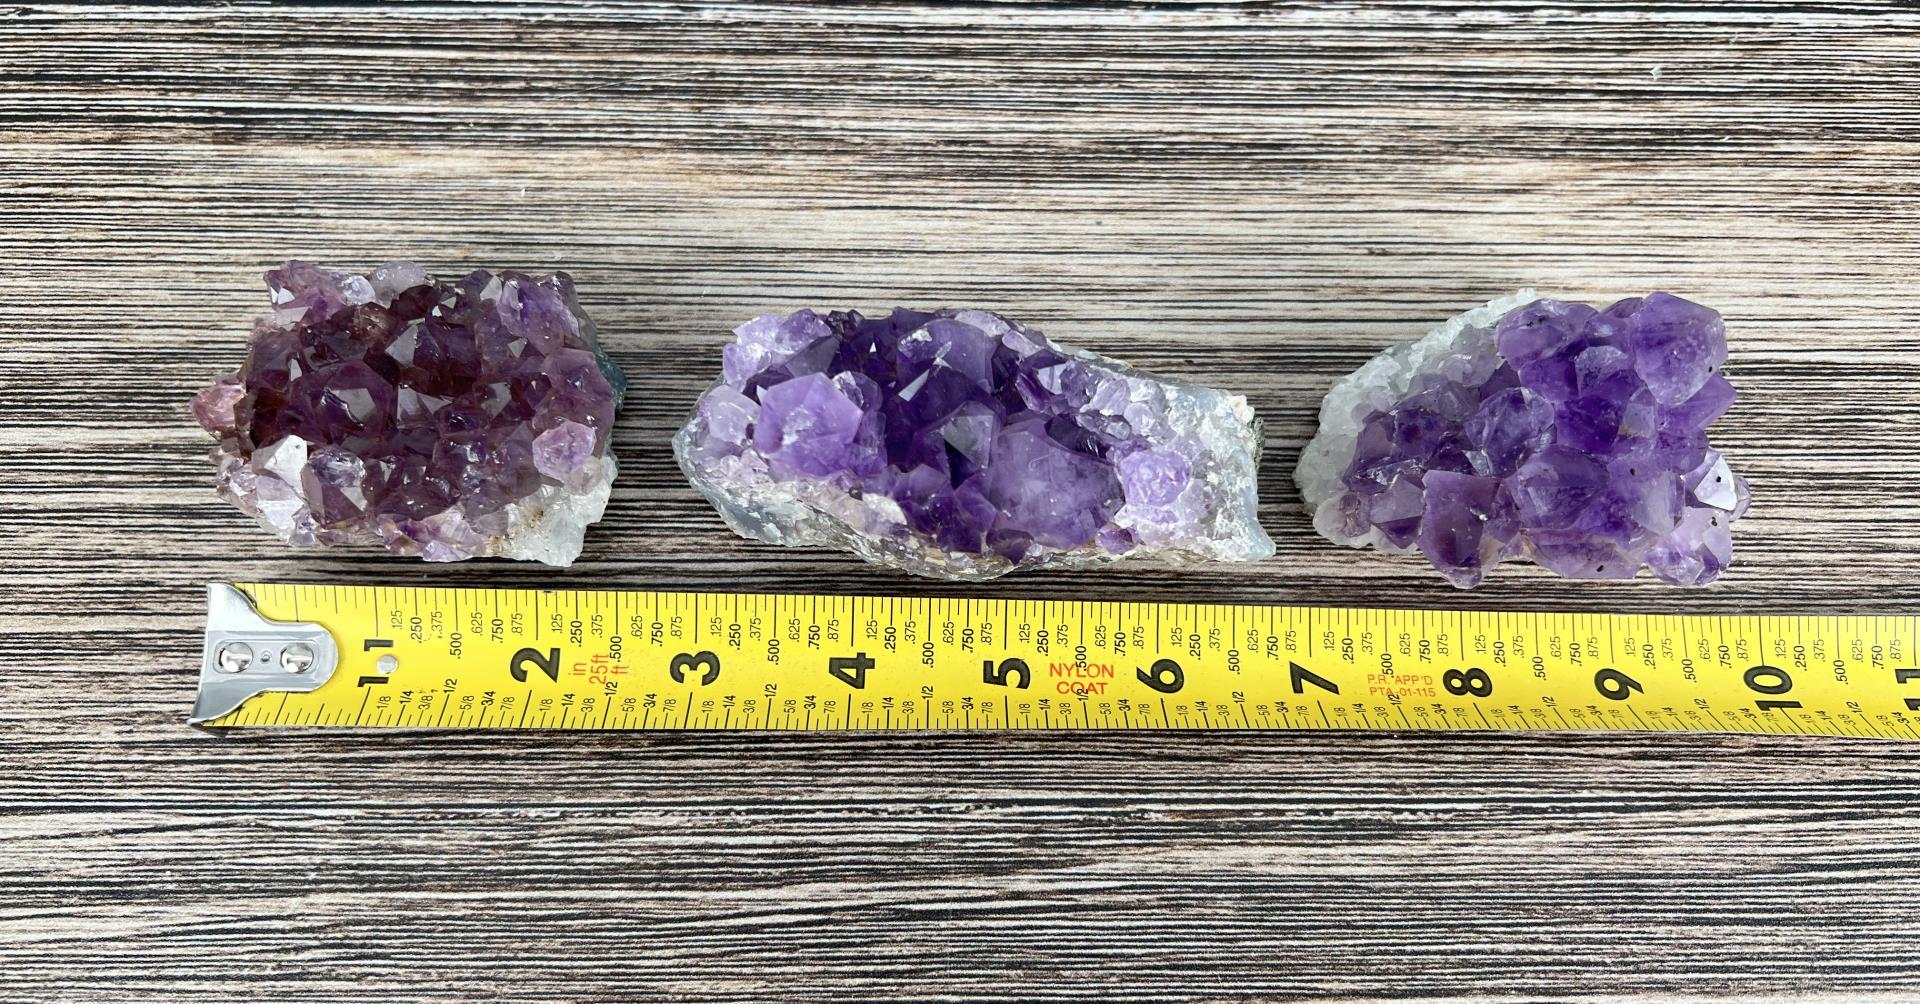 Collection of Brazilian Amethyst Mineral Specimens